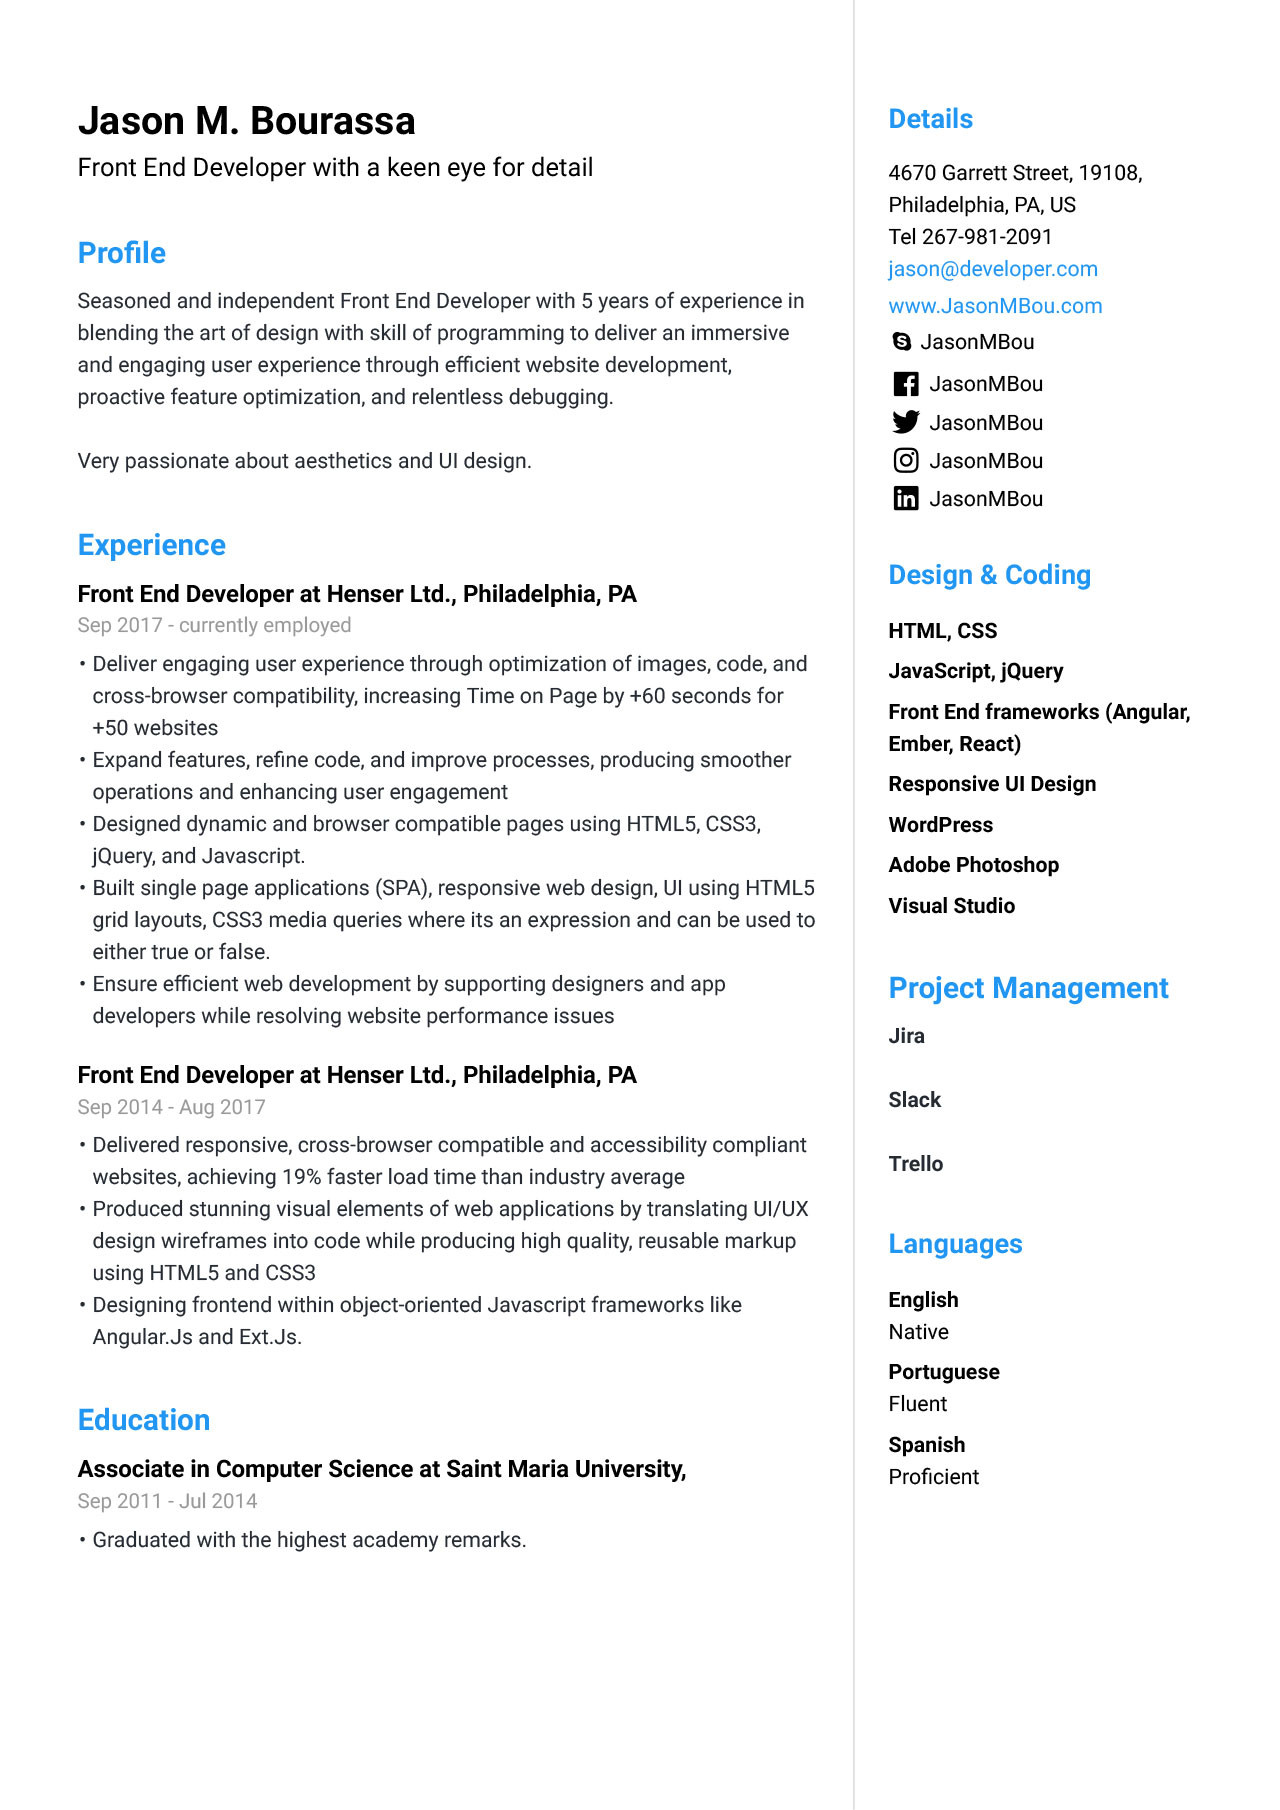 Sample Resume with HTML 5 Skills Front End Developer Resume [guide & Examples] – Jofibo